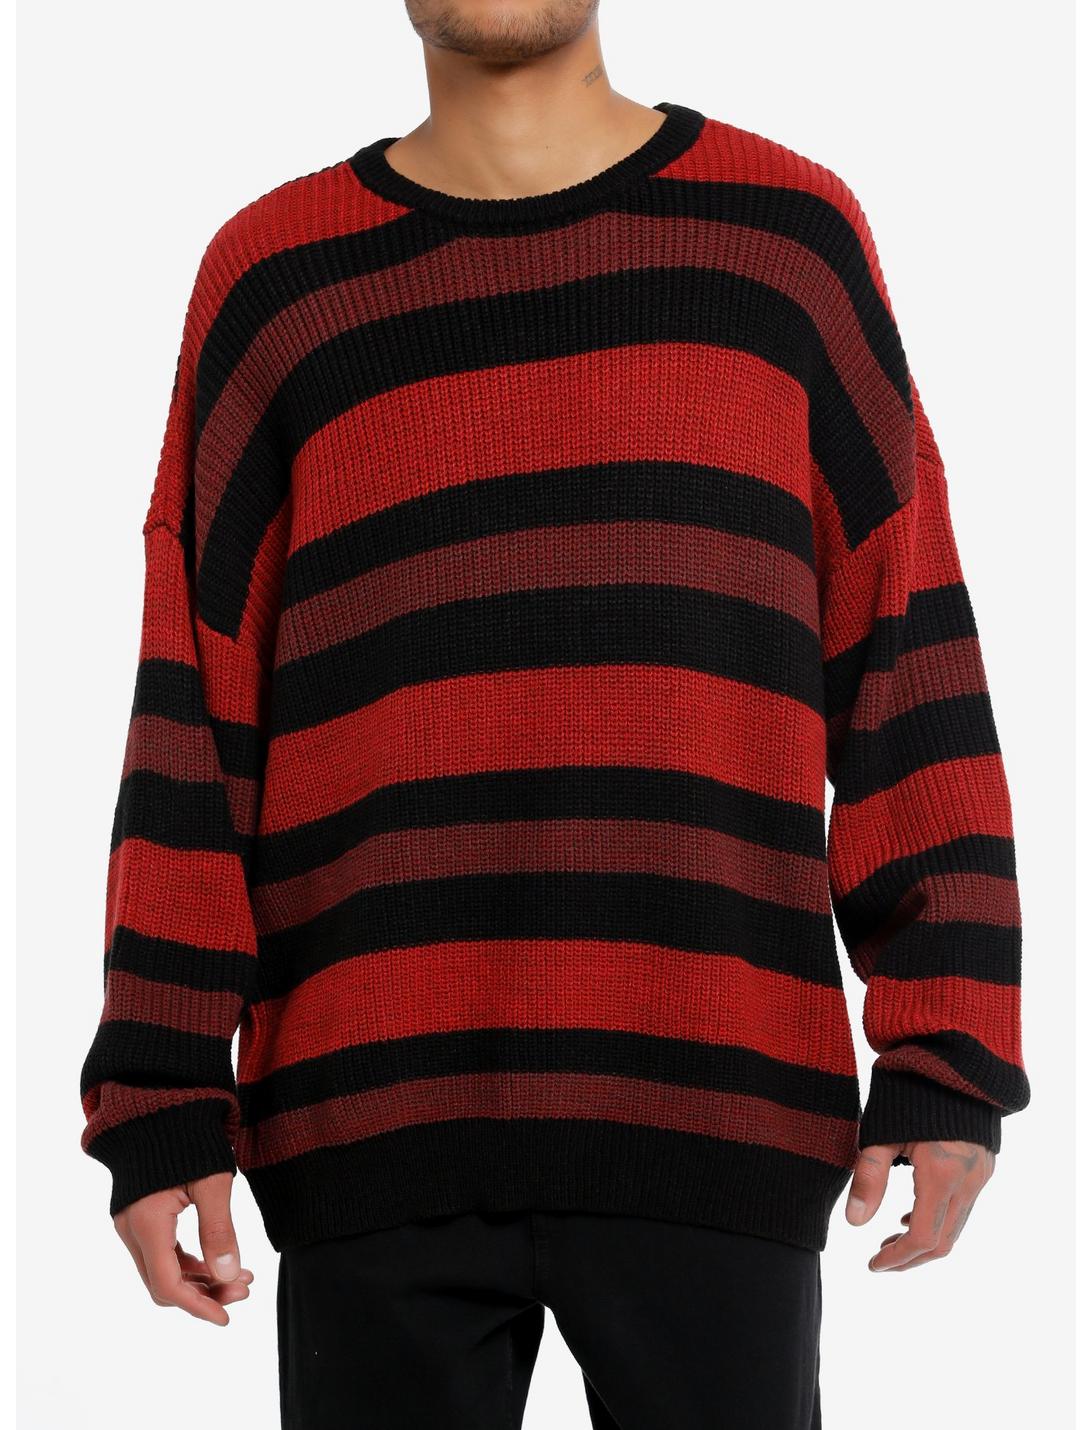 Thorn & Fable™ Red Maroon & Black Stripe Knit Sweater, RED, hi-res